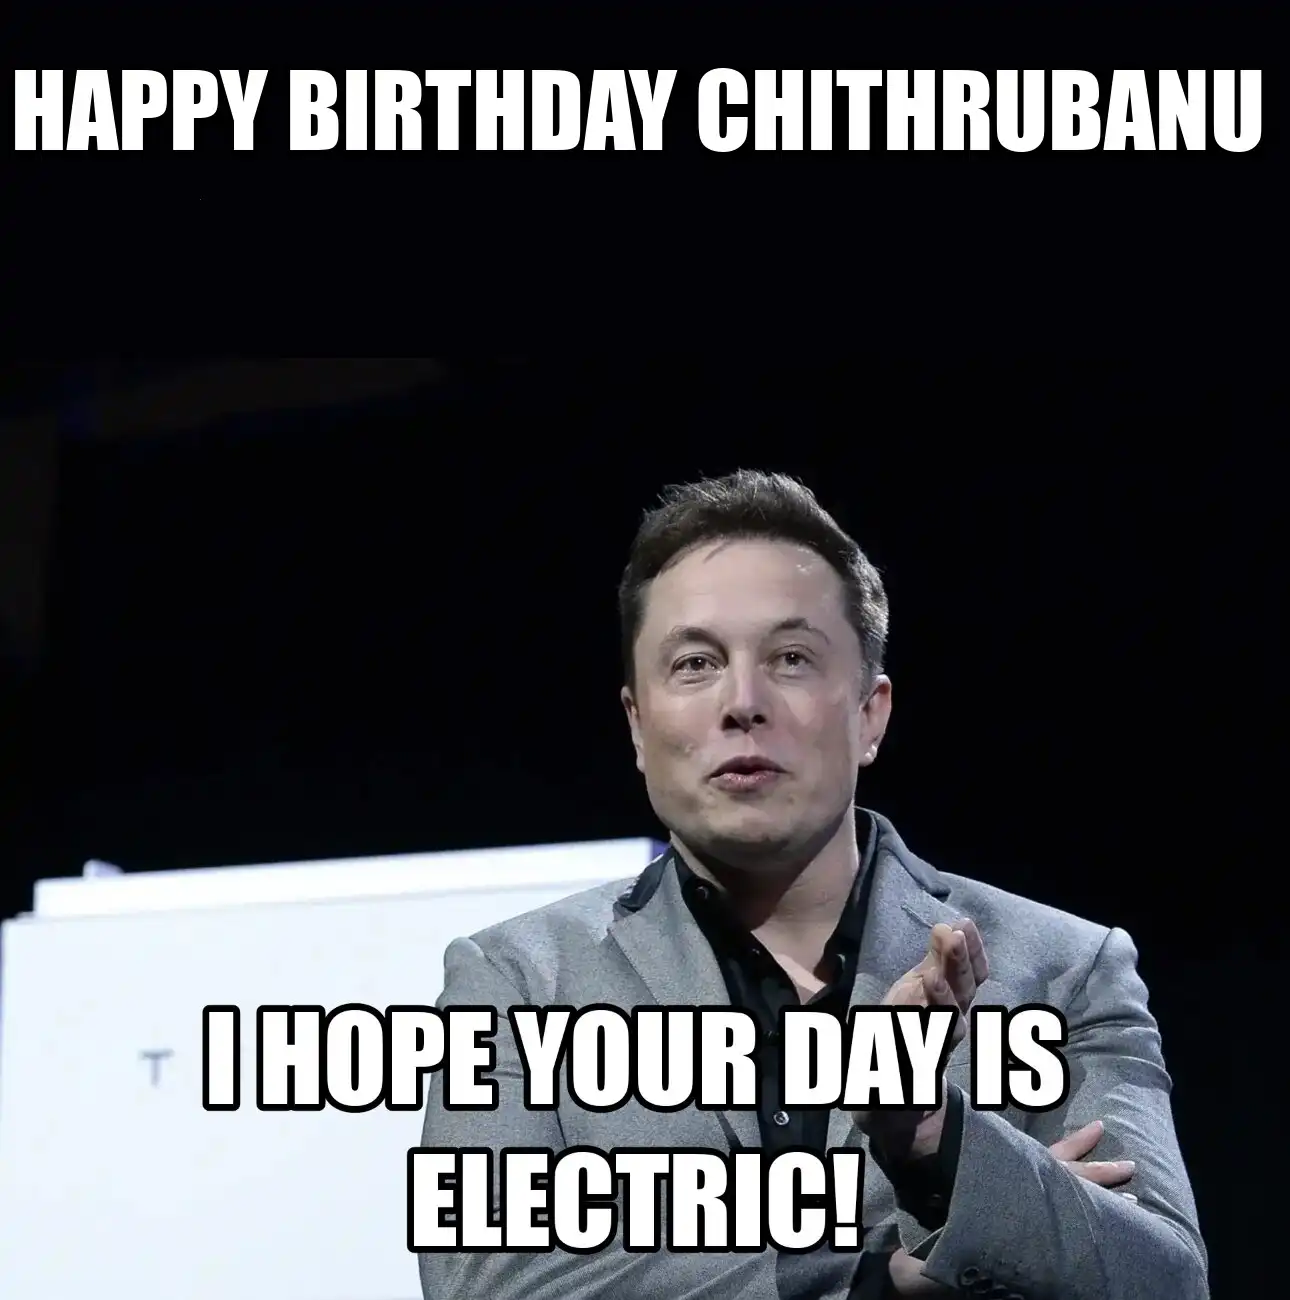 Happy Birthday Chithrubanu I Hope Your Day Is Electric Meme